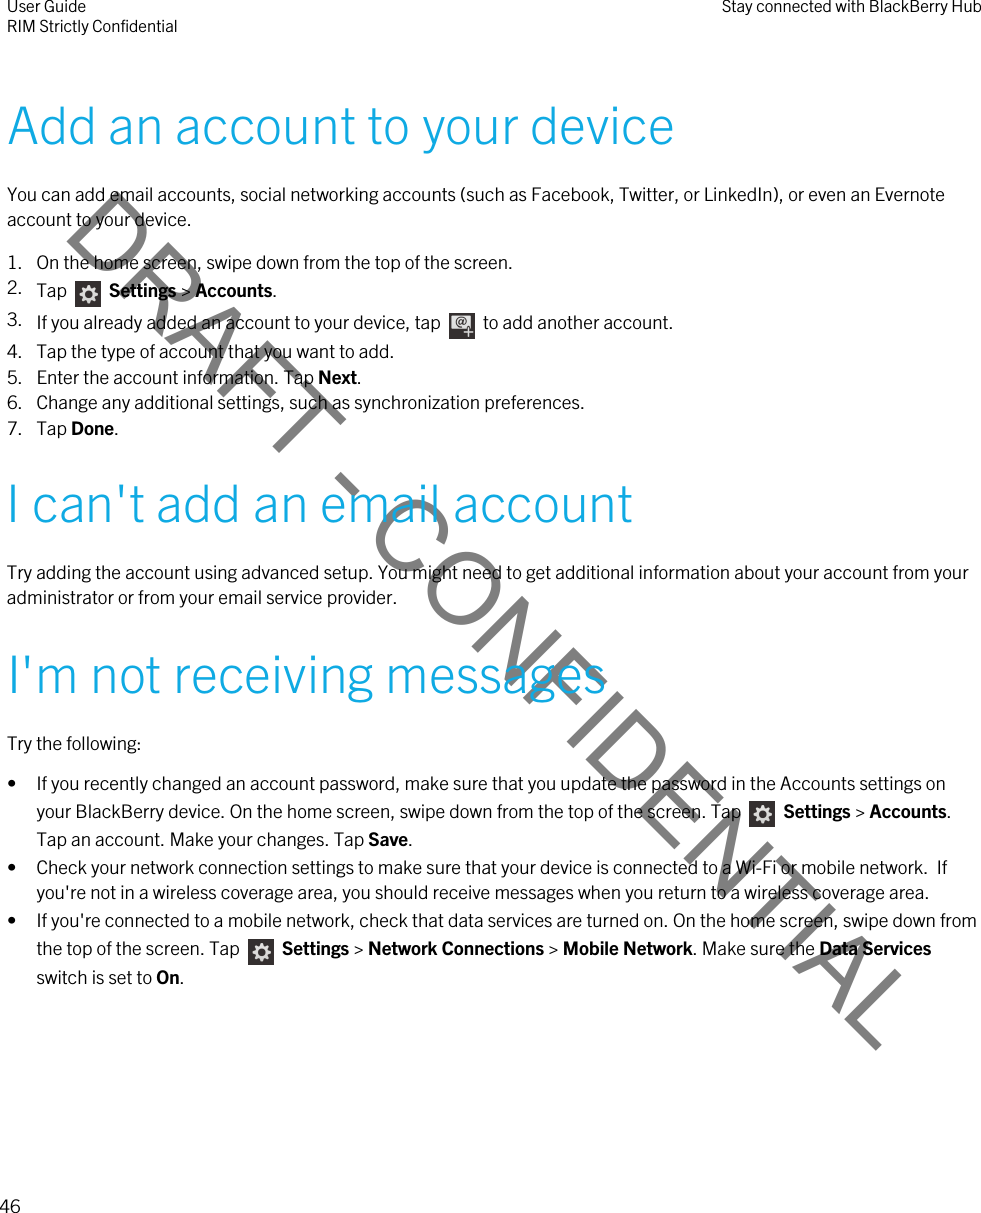 DRAFT - CONFIDENTIALAdd an account to your deviceYou can add email accounts, social networking accounts (such as Facebook, Twitter, or LinkedIn), or even an Evernote account to your device.1. On the home screen, swipe down from the top of the screen.2. Tap    Settings &gt; Accounts.3. If you already added an account to your device, tap    to add another account.4. Tap the type of account that you want to add.5. Enter the account information. Tap Next.6. Change any additional settings, such as synchronization preferences.7. Tap Done.I can&apos;t add an email accountTry adding the account using advanced setup. You might need to get additional information about your account from your administrator or from your email service provider.I&apos;m not receiving messagesTry the following:• If you recently changed an account password, make sure that you update the password in the Accounts settings on your BlackBerry device. On the home screen, swipe down from the top of the screen. Tap   Settings &gt; Accounts. Tap an account. Make your changes. Tap Save.• Check your network connection settings to make sure that your device is connected to a Wi-Fi or mobile network.  If you&apos;re not in a wireless coverage area, you should receive messages when you return to a wireless coverage area.• If you&apos;re connected to a mobile network, check that data services are turned on. On the home screen, swipe down from the top of the screen. Tap    Settings &gt; Network Connections &gt; Mobile Network. Make sure the Data Services switch is set to On.User GuideRIM Strictly Confidential Stay connected with BlackBerry Hub46 